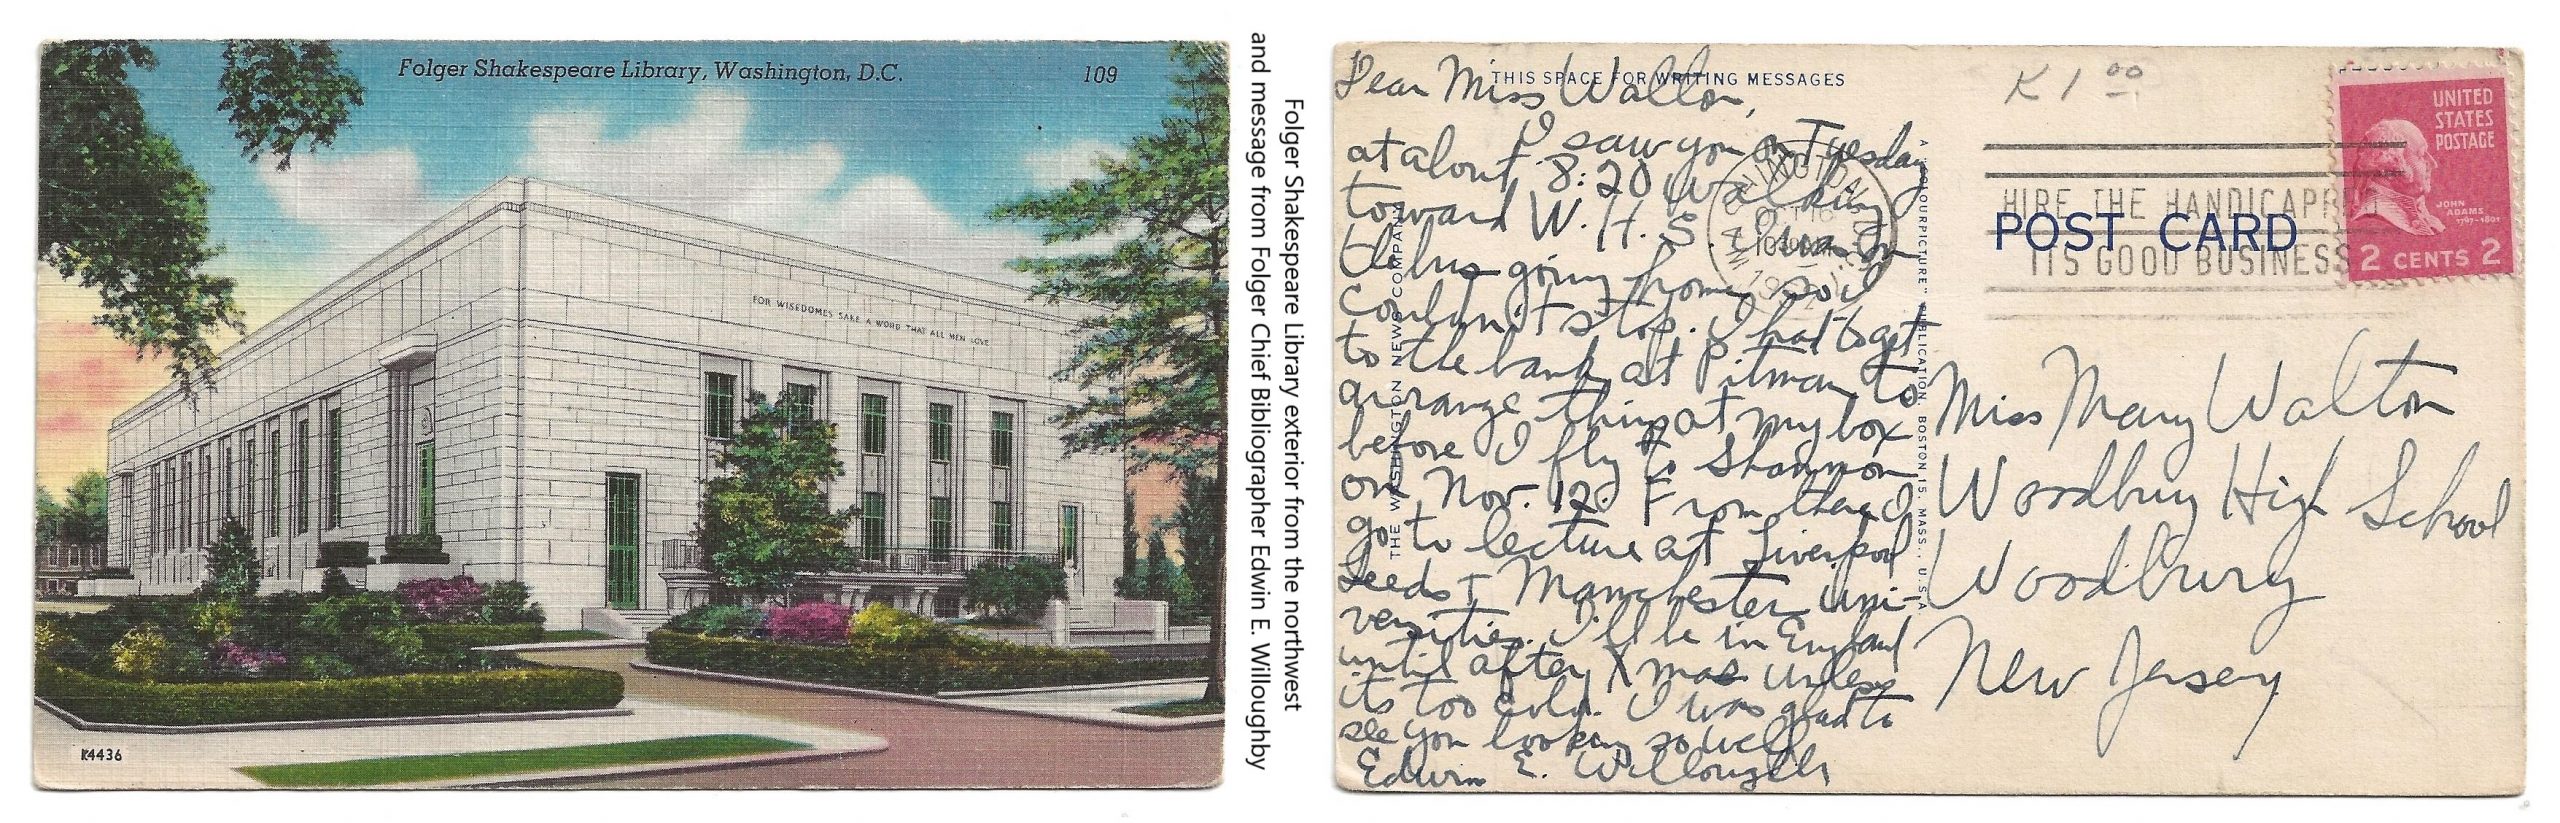 Front and back of a postcard depicting the Folger with writing